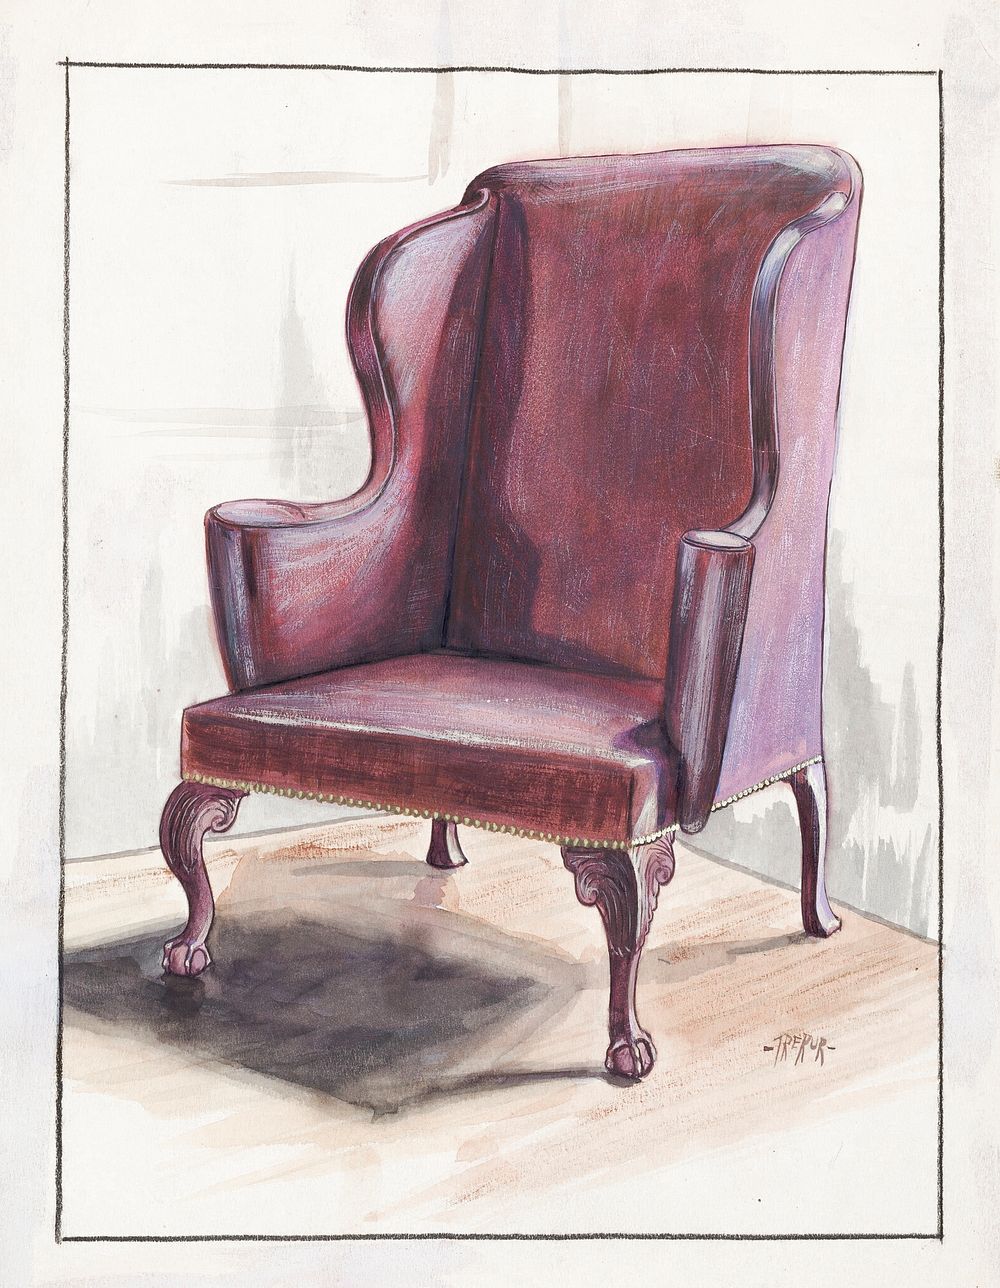 Wing Chair (ca.1936) by Michael Trekur. Original from The National Gallery of Art. Digitally enhanced by rawpixel.